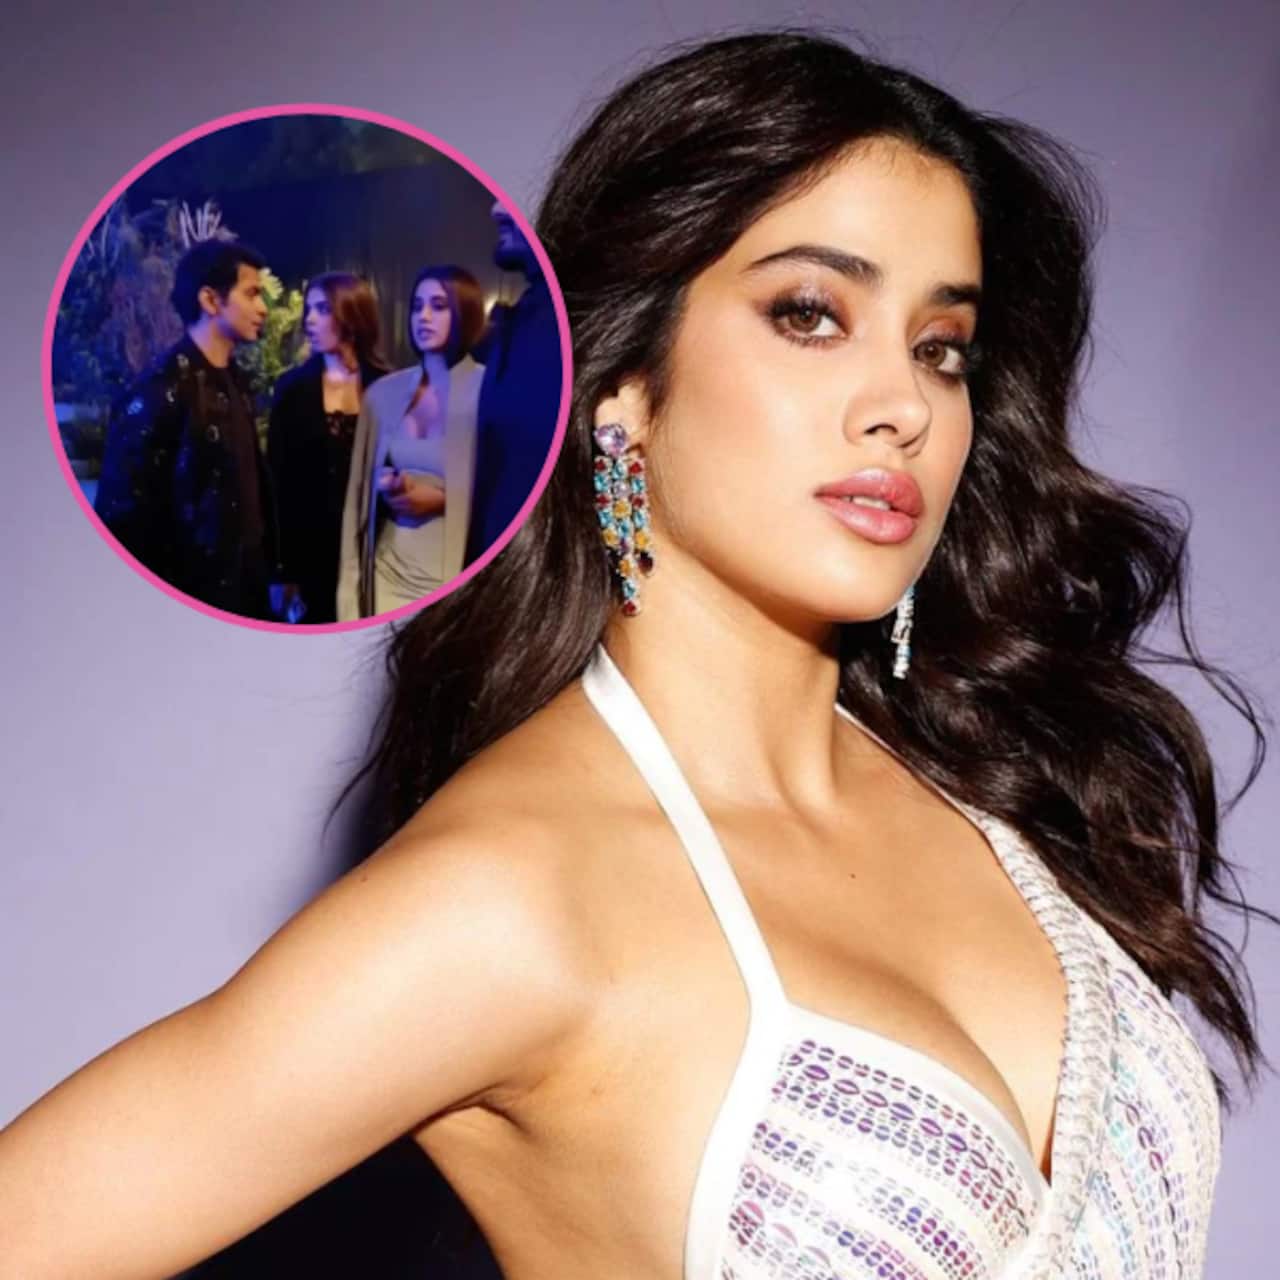 Is Janhvi Kapoor dating her ex Shikhar Pahariya again? The duo's video goes viral online sparking rumours again [Watch]